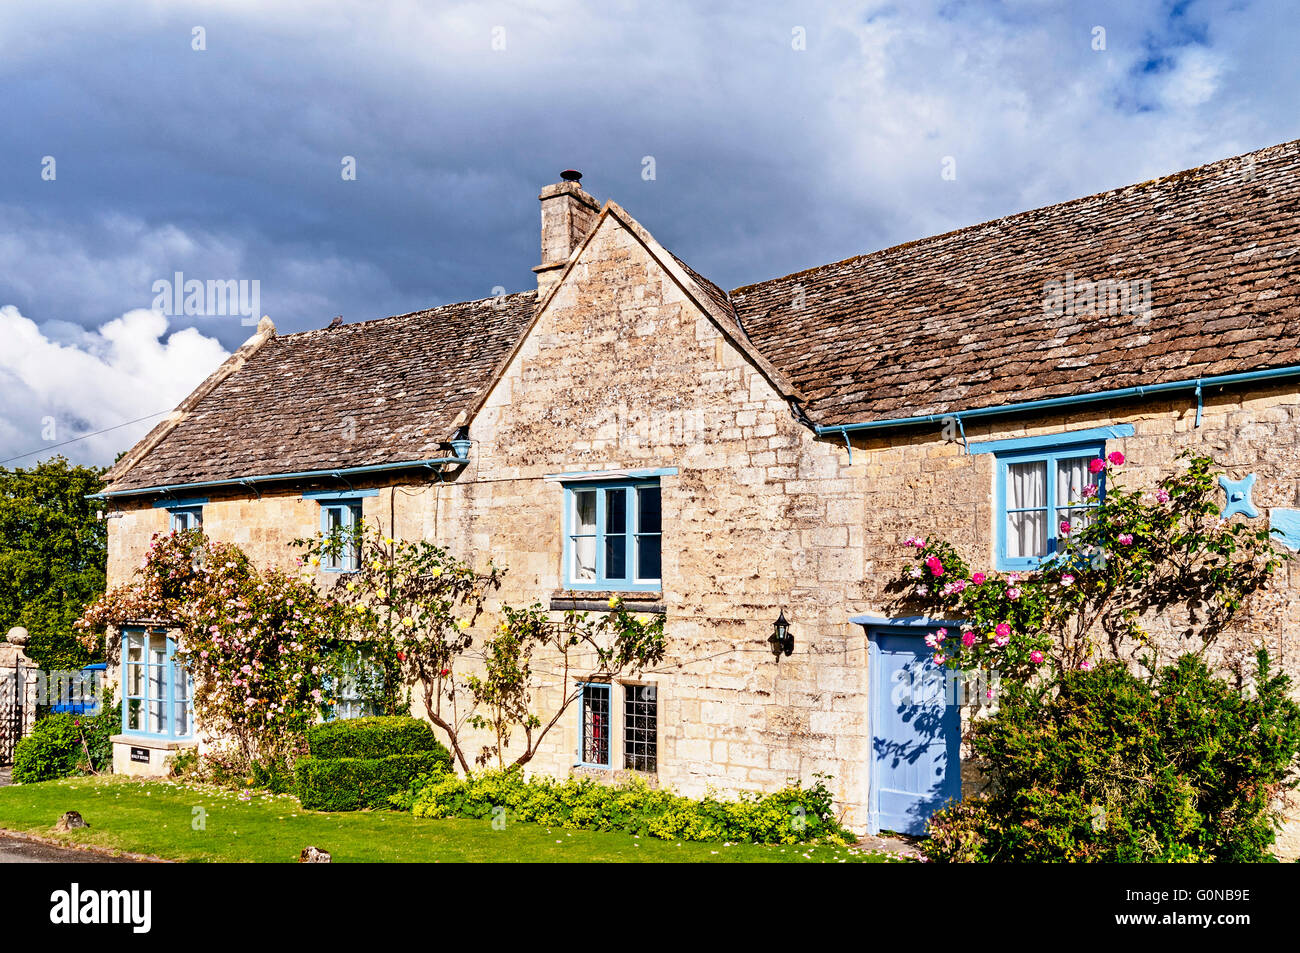 Cottage in the Heart of England, Bauernkate im Herzen Englands Stock Photo